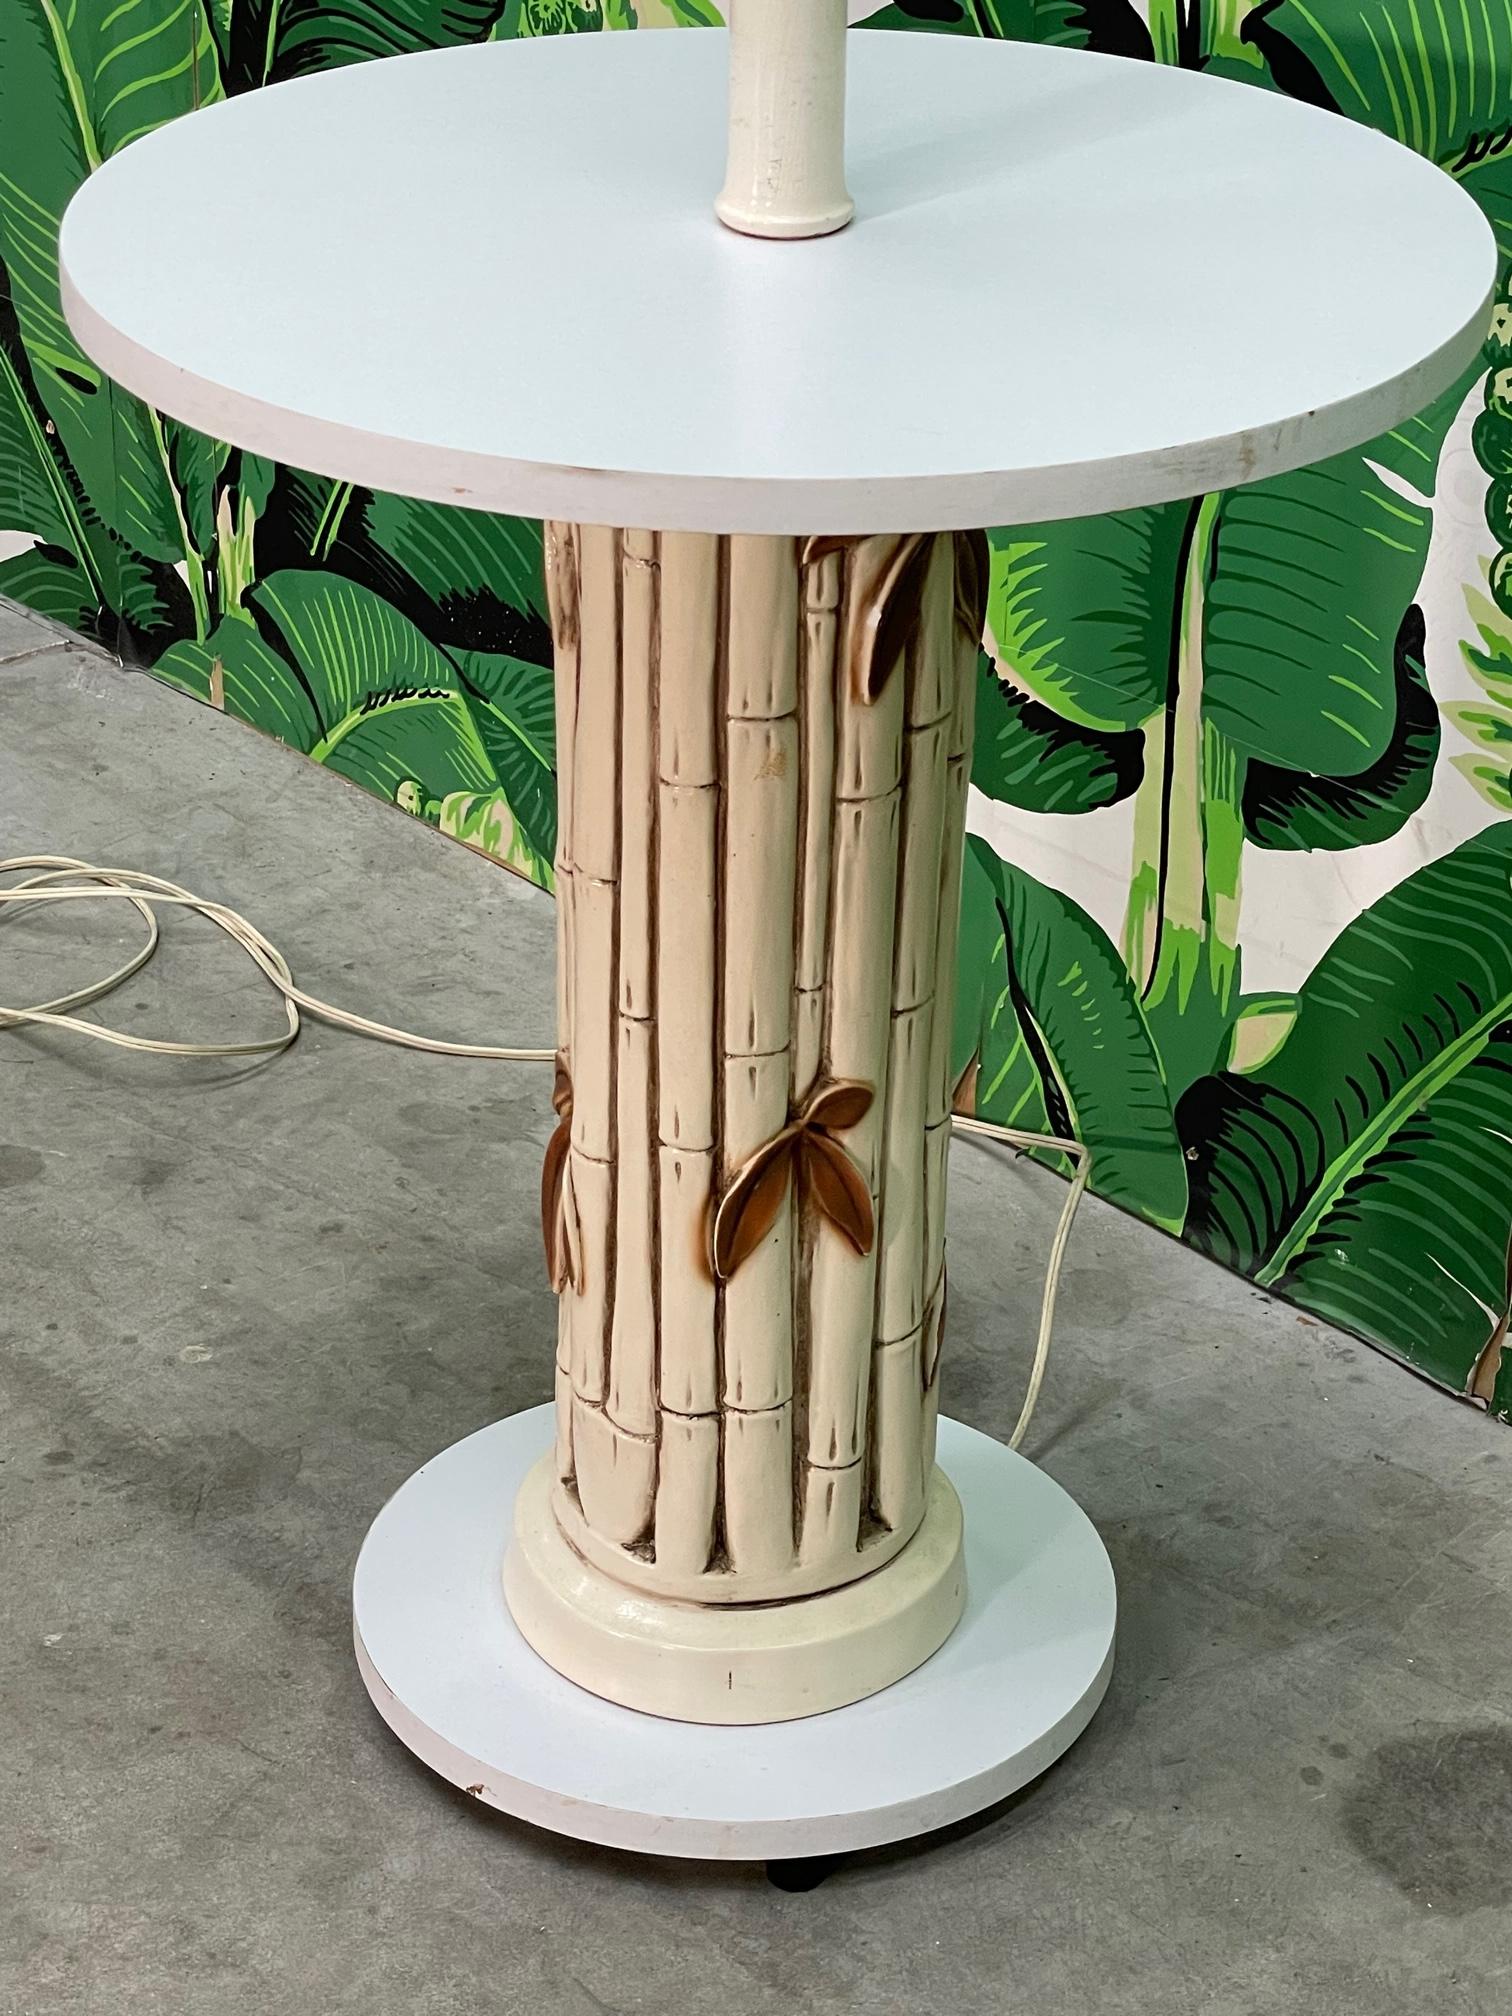 Mid Century Faux Bamboo Floor Lamp Table In Good Condition For Sale In Jacksonville, FL